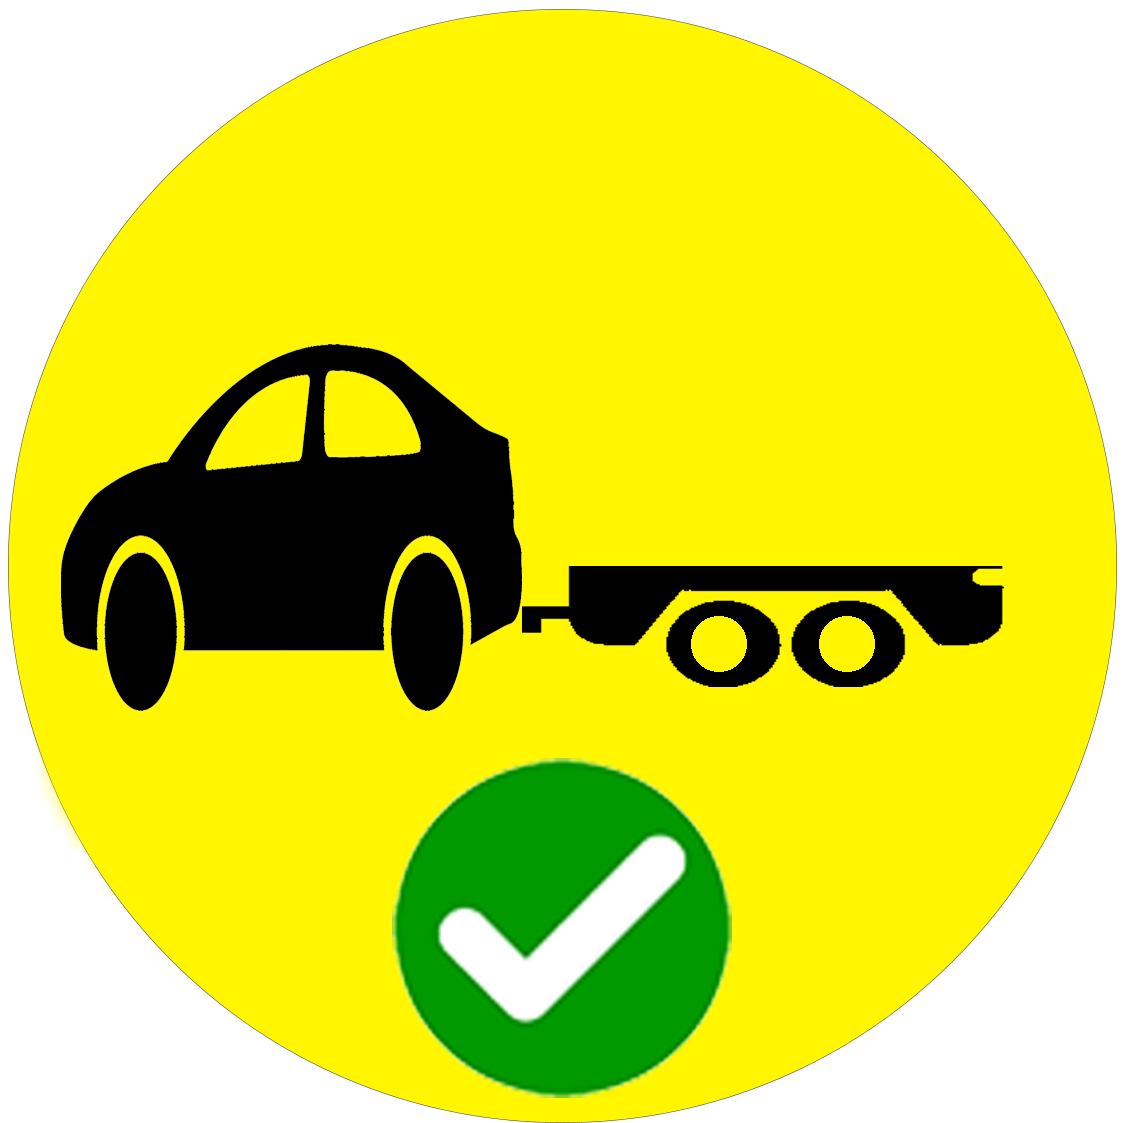 Car and trailer icon